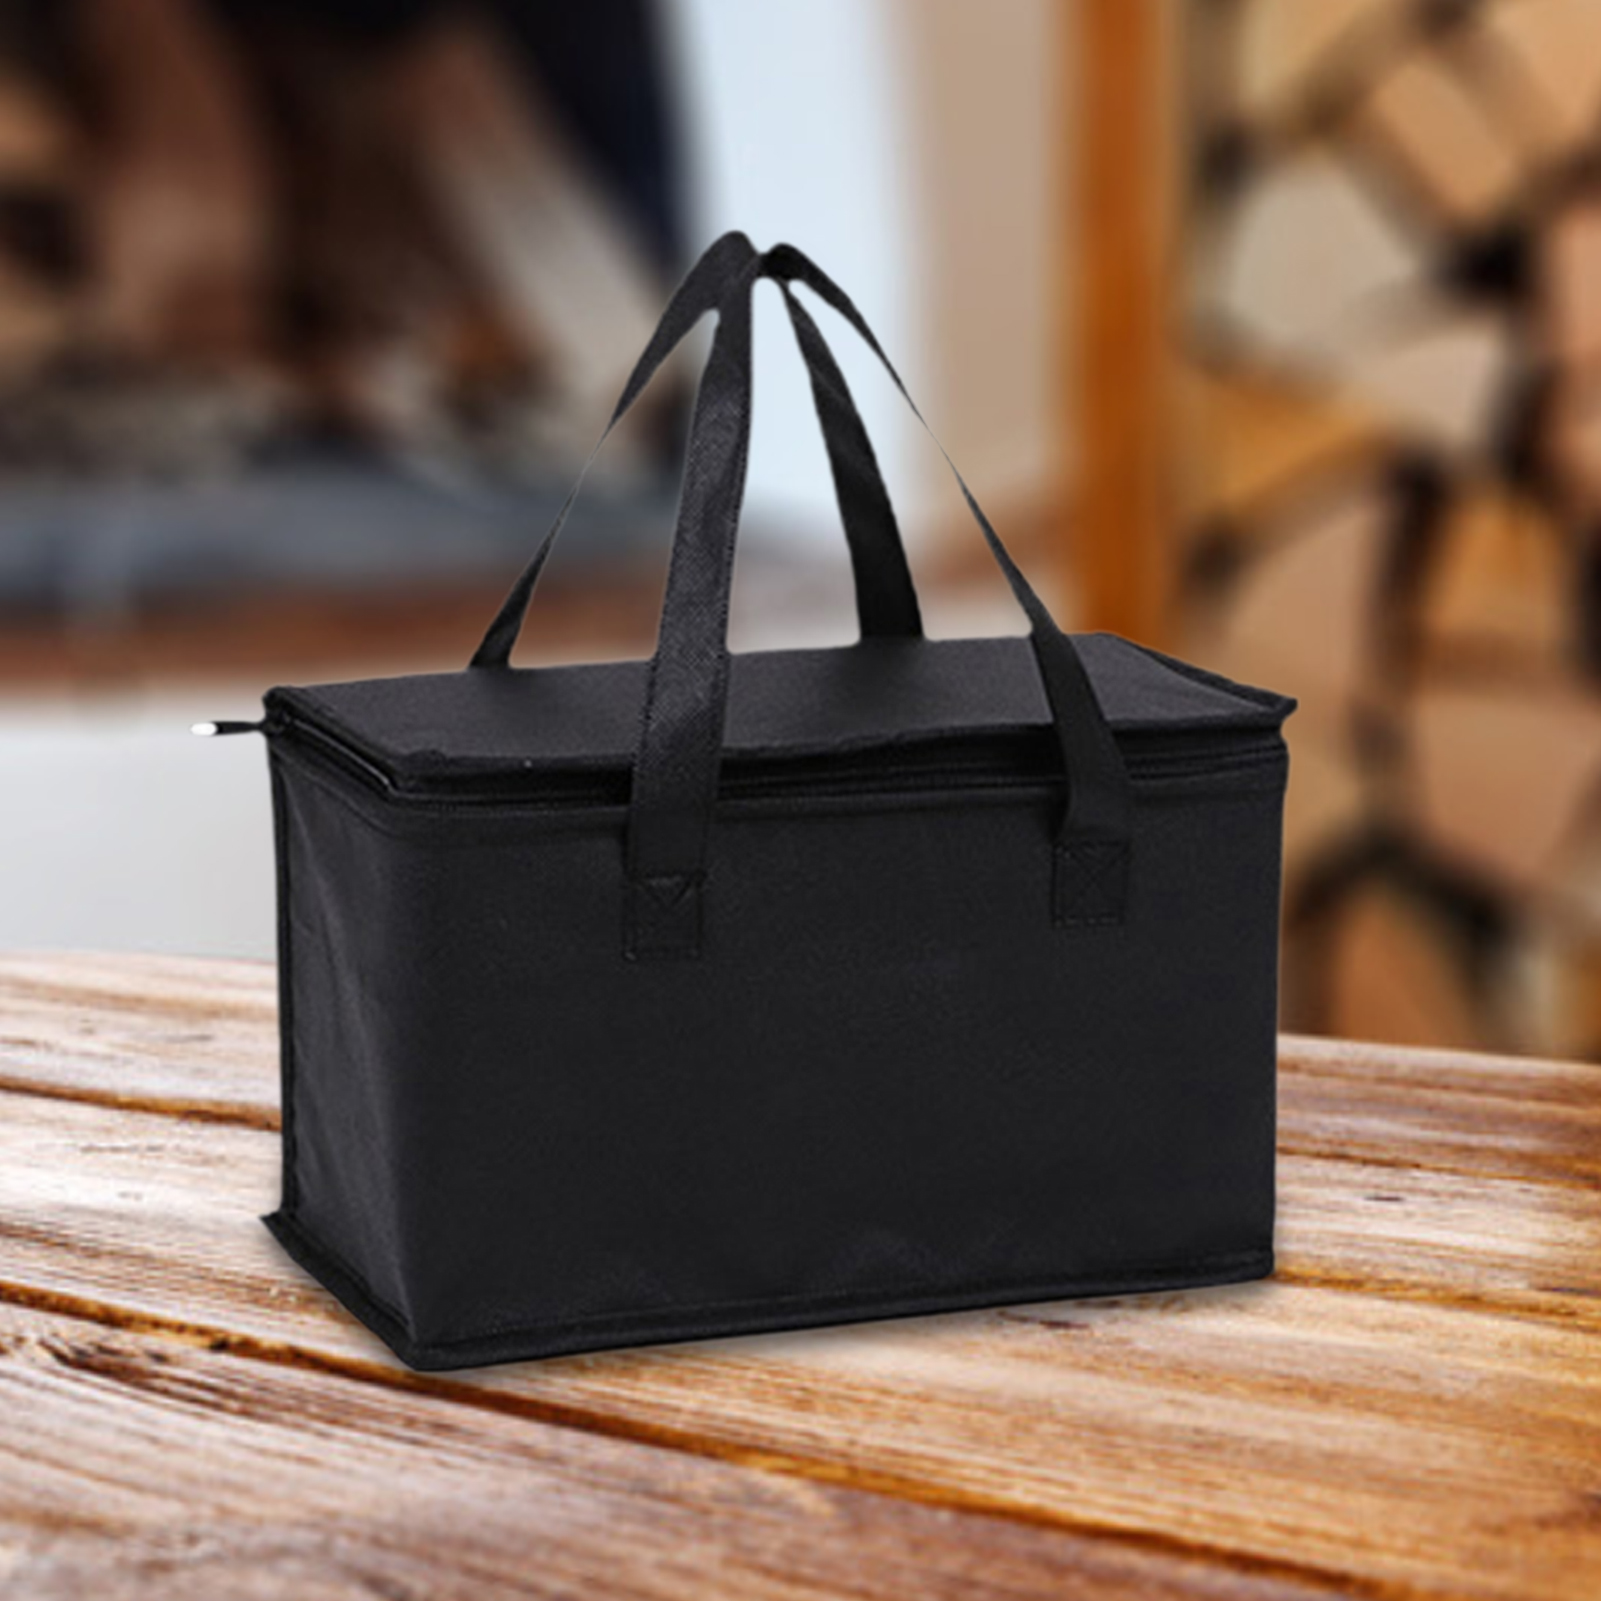 Ludlz Large Lunch Bag Insulated Lunch Box Soft Cooler Cooling Tote for Adult Men Women, Lunch Cooler Bag Folding Insulation Picnic Pack Food Thermal Bag Carrier Pouch - image 4 of 7